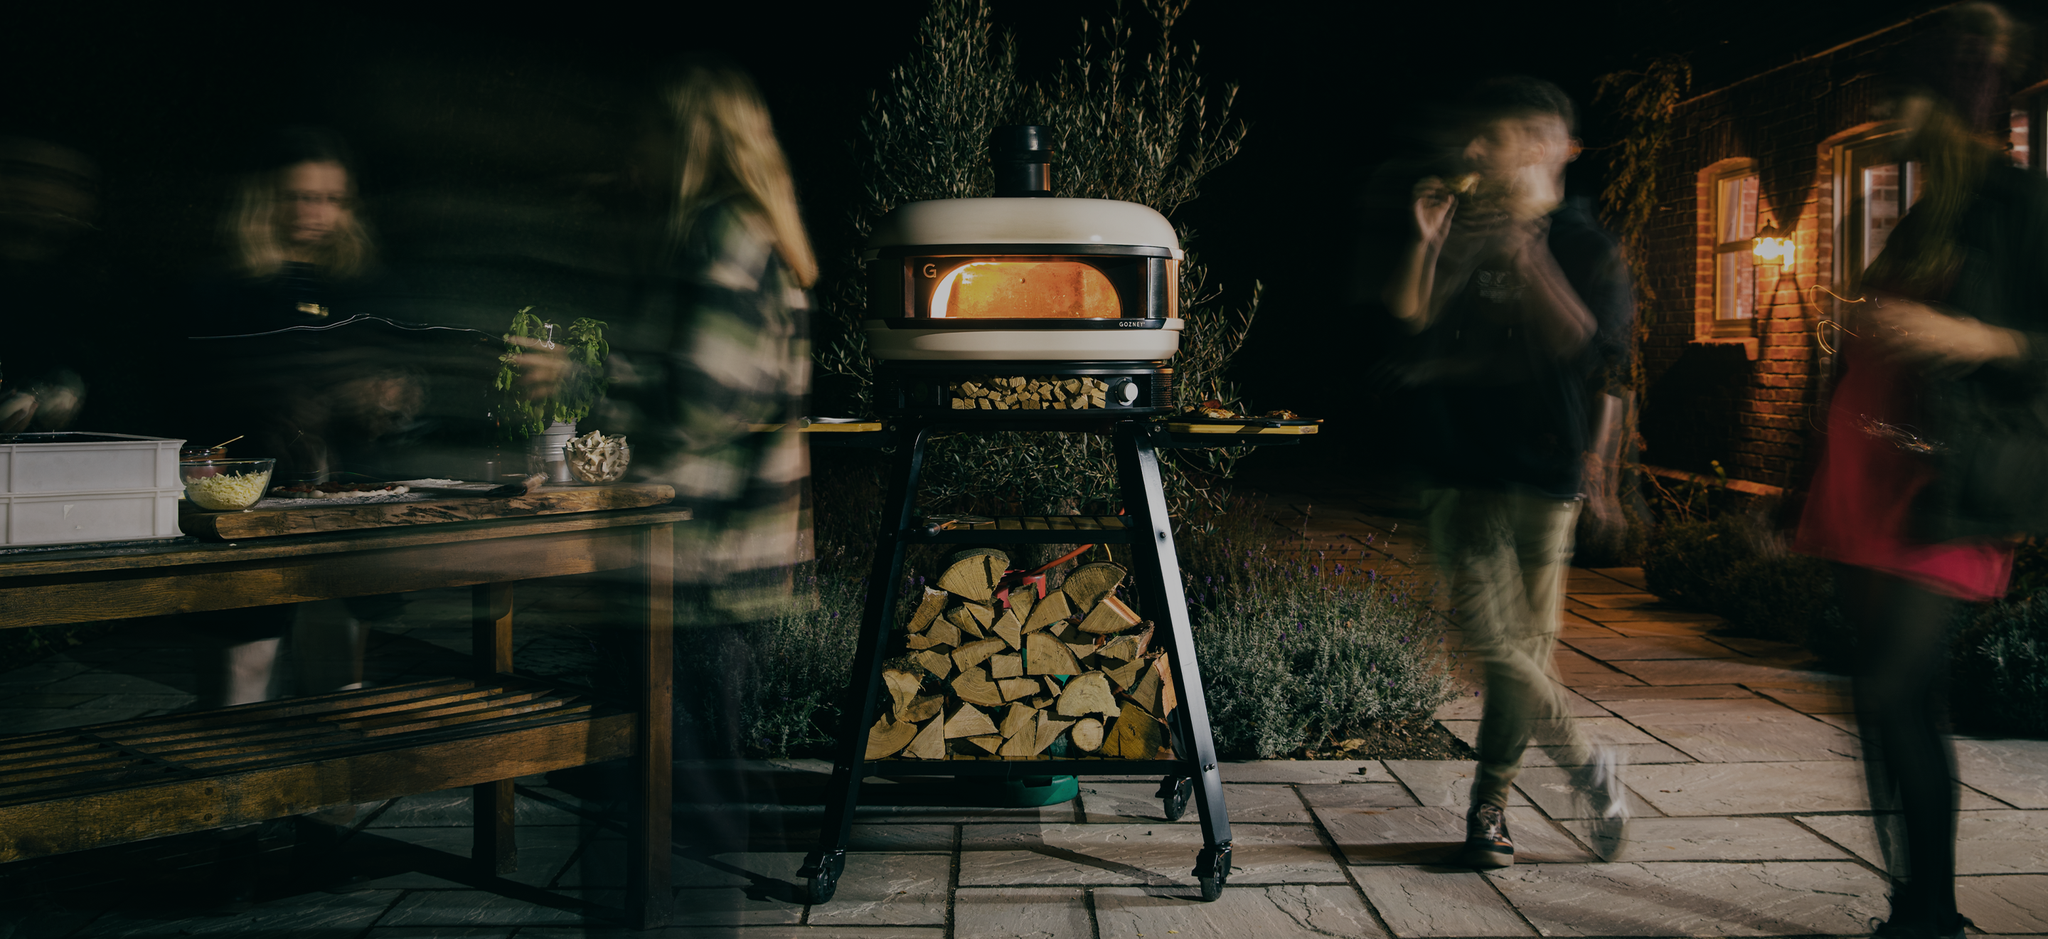 Pizza part at night with lit pizza oven